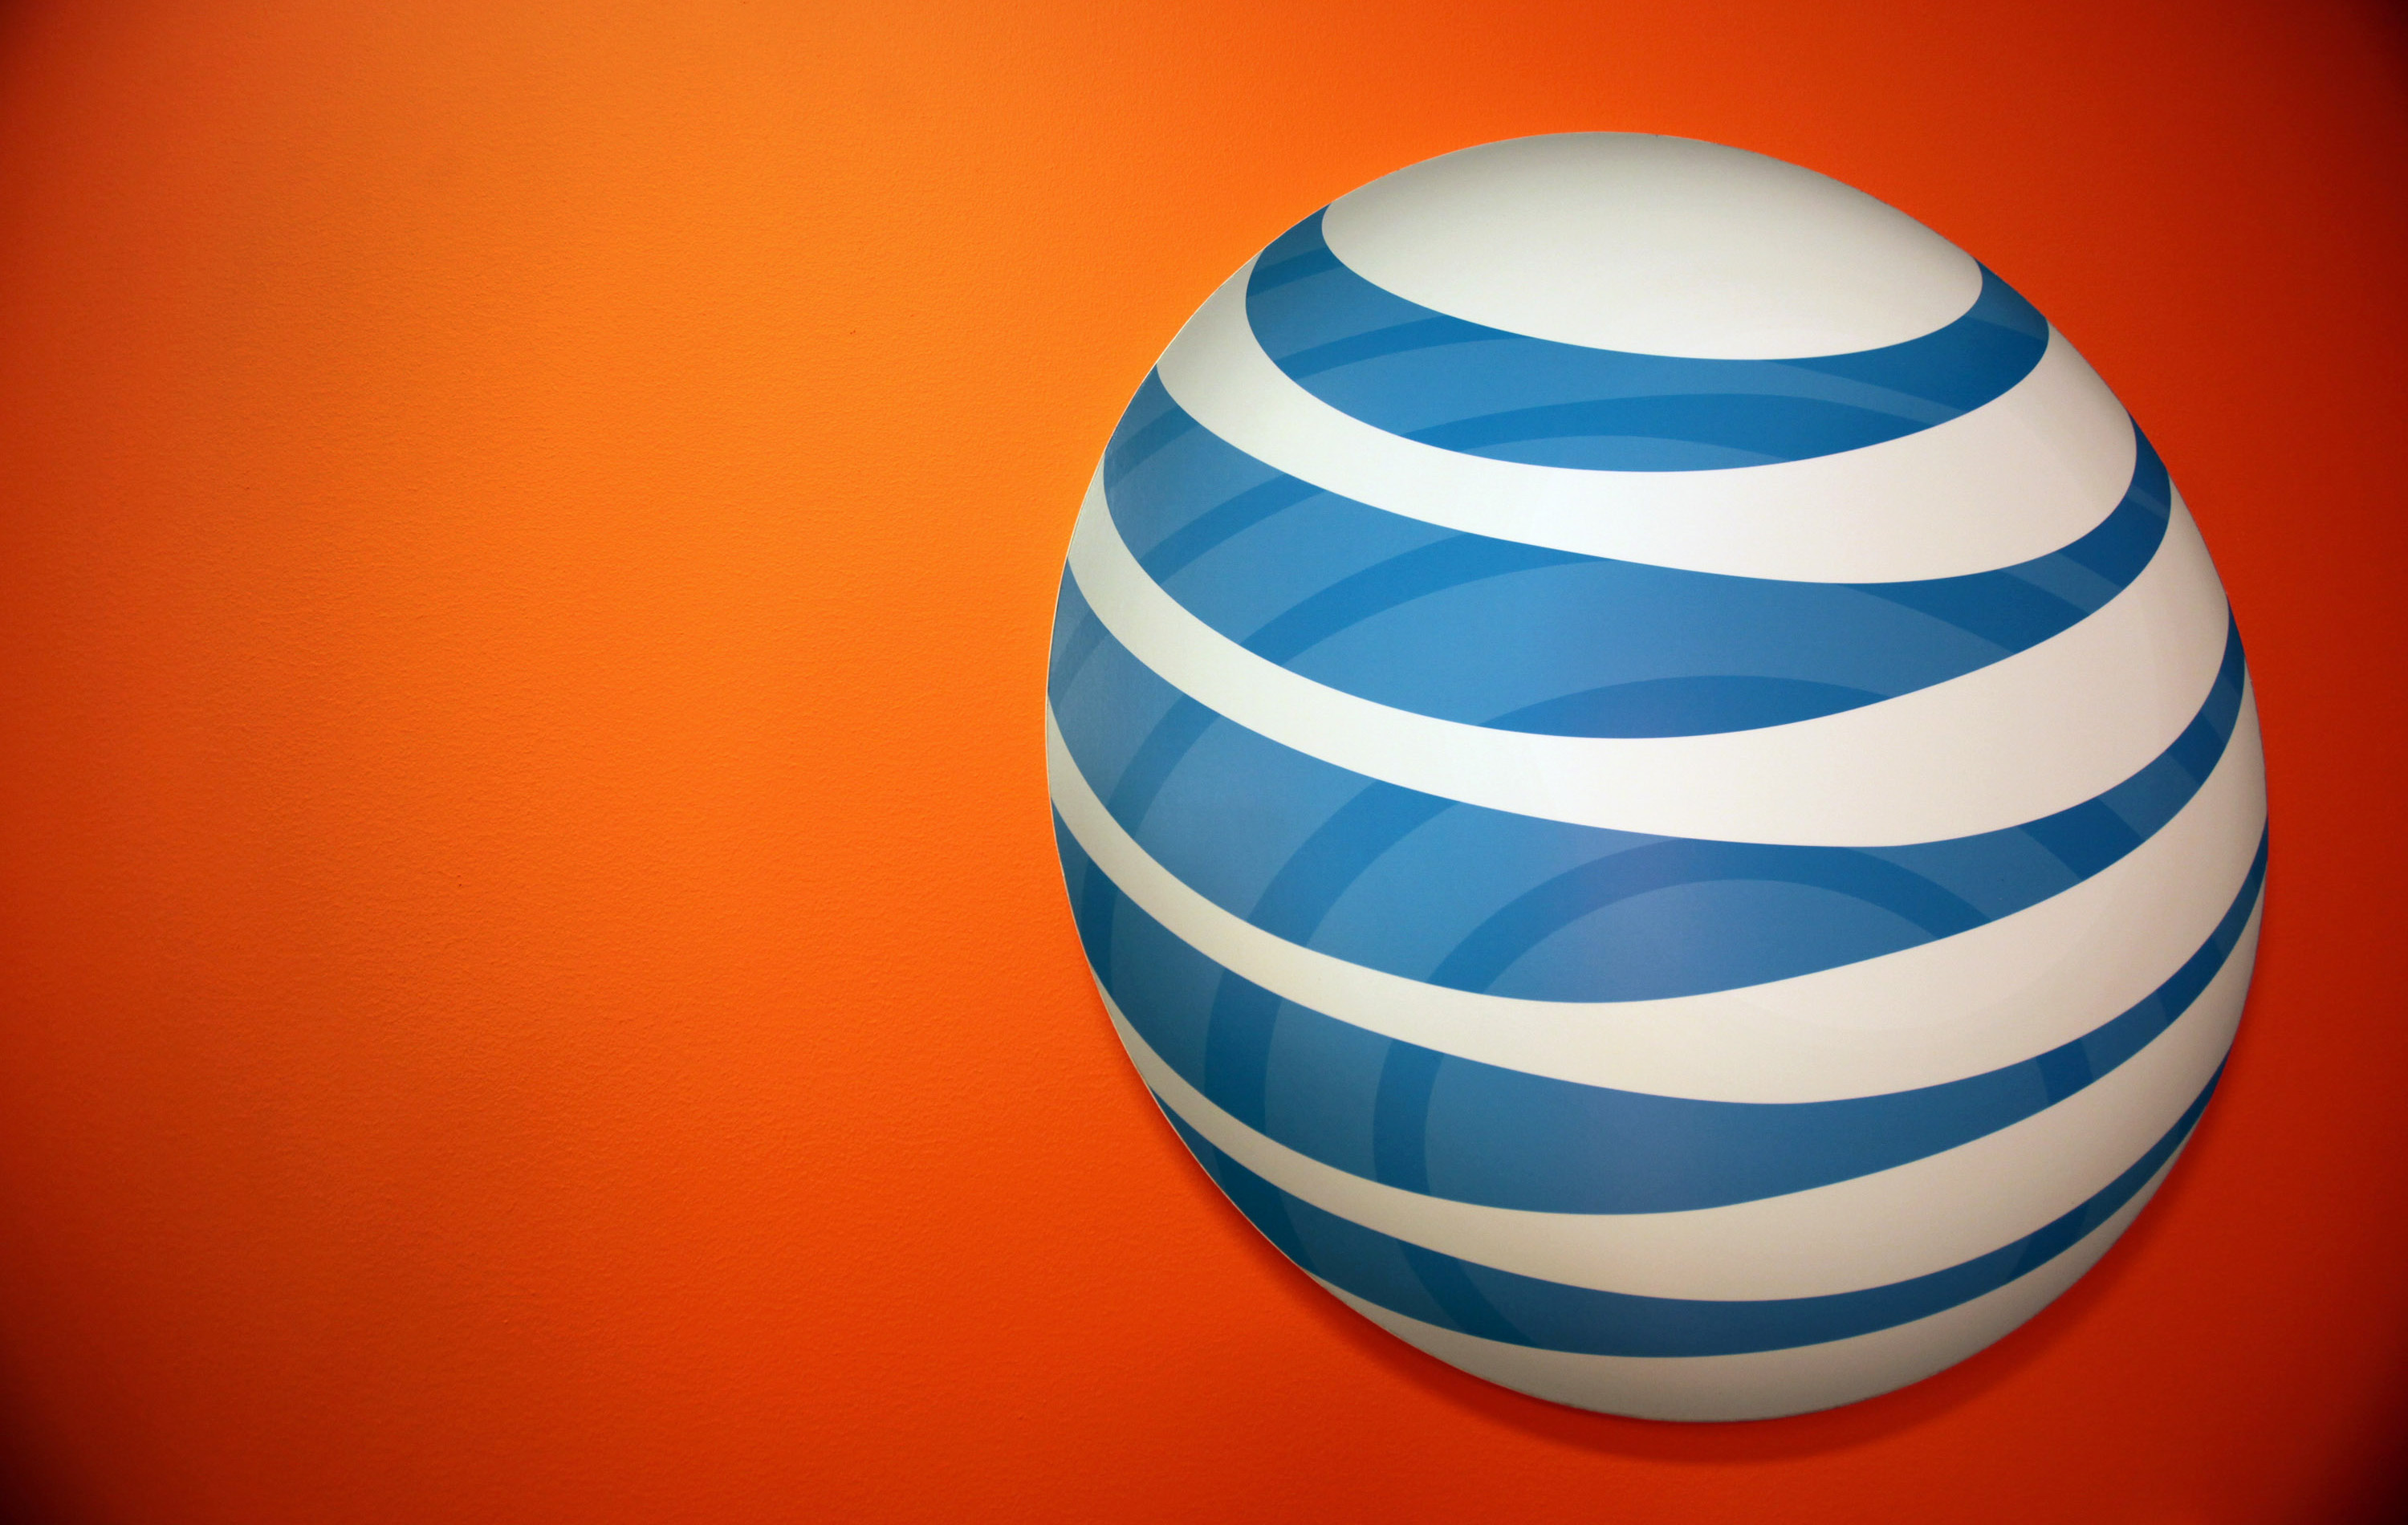 AT&amp;T Asks U.S. Judge to Throw Out Sprint's Antitrust Lawsuit